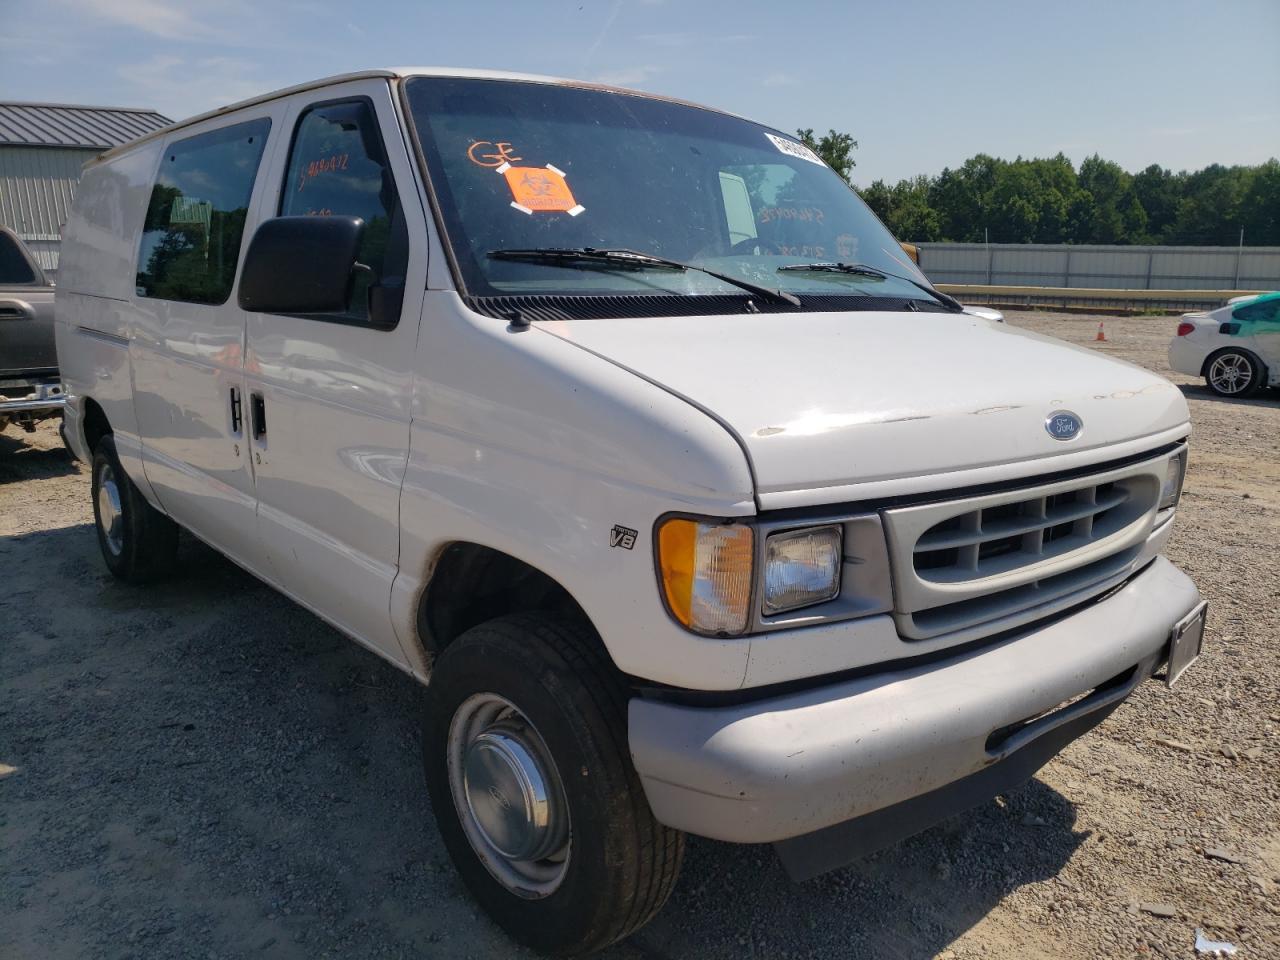 Used 2002 FORD FORD E250 VAN DETAILS - Pick N Save